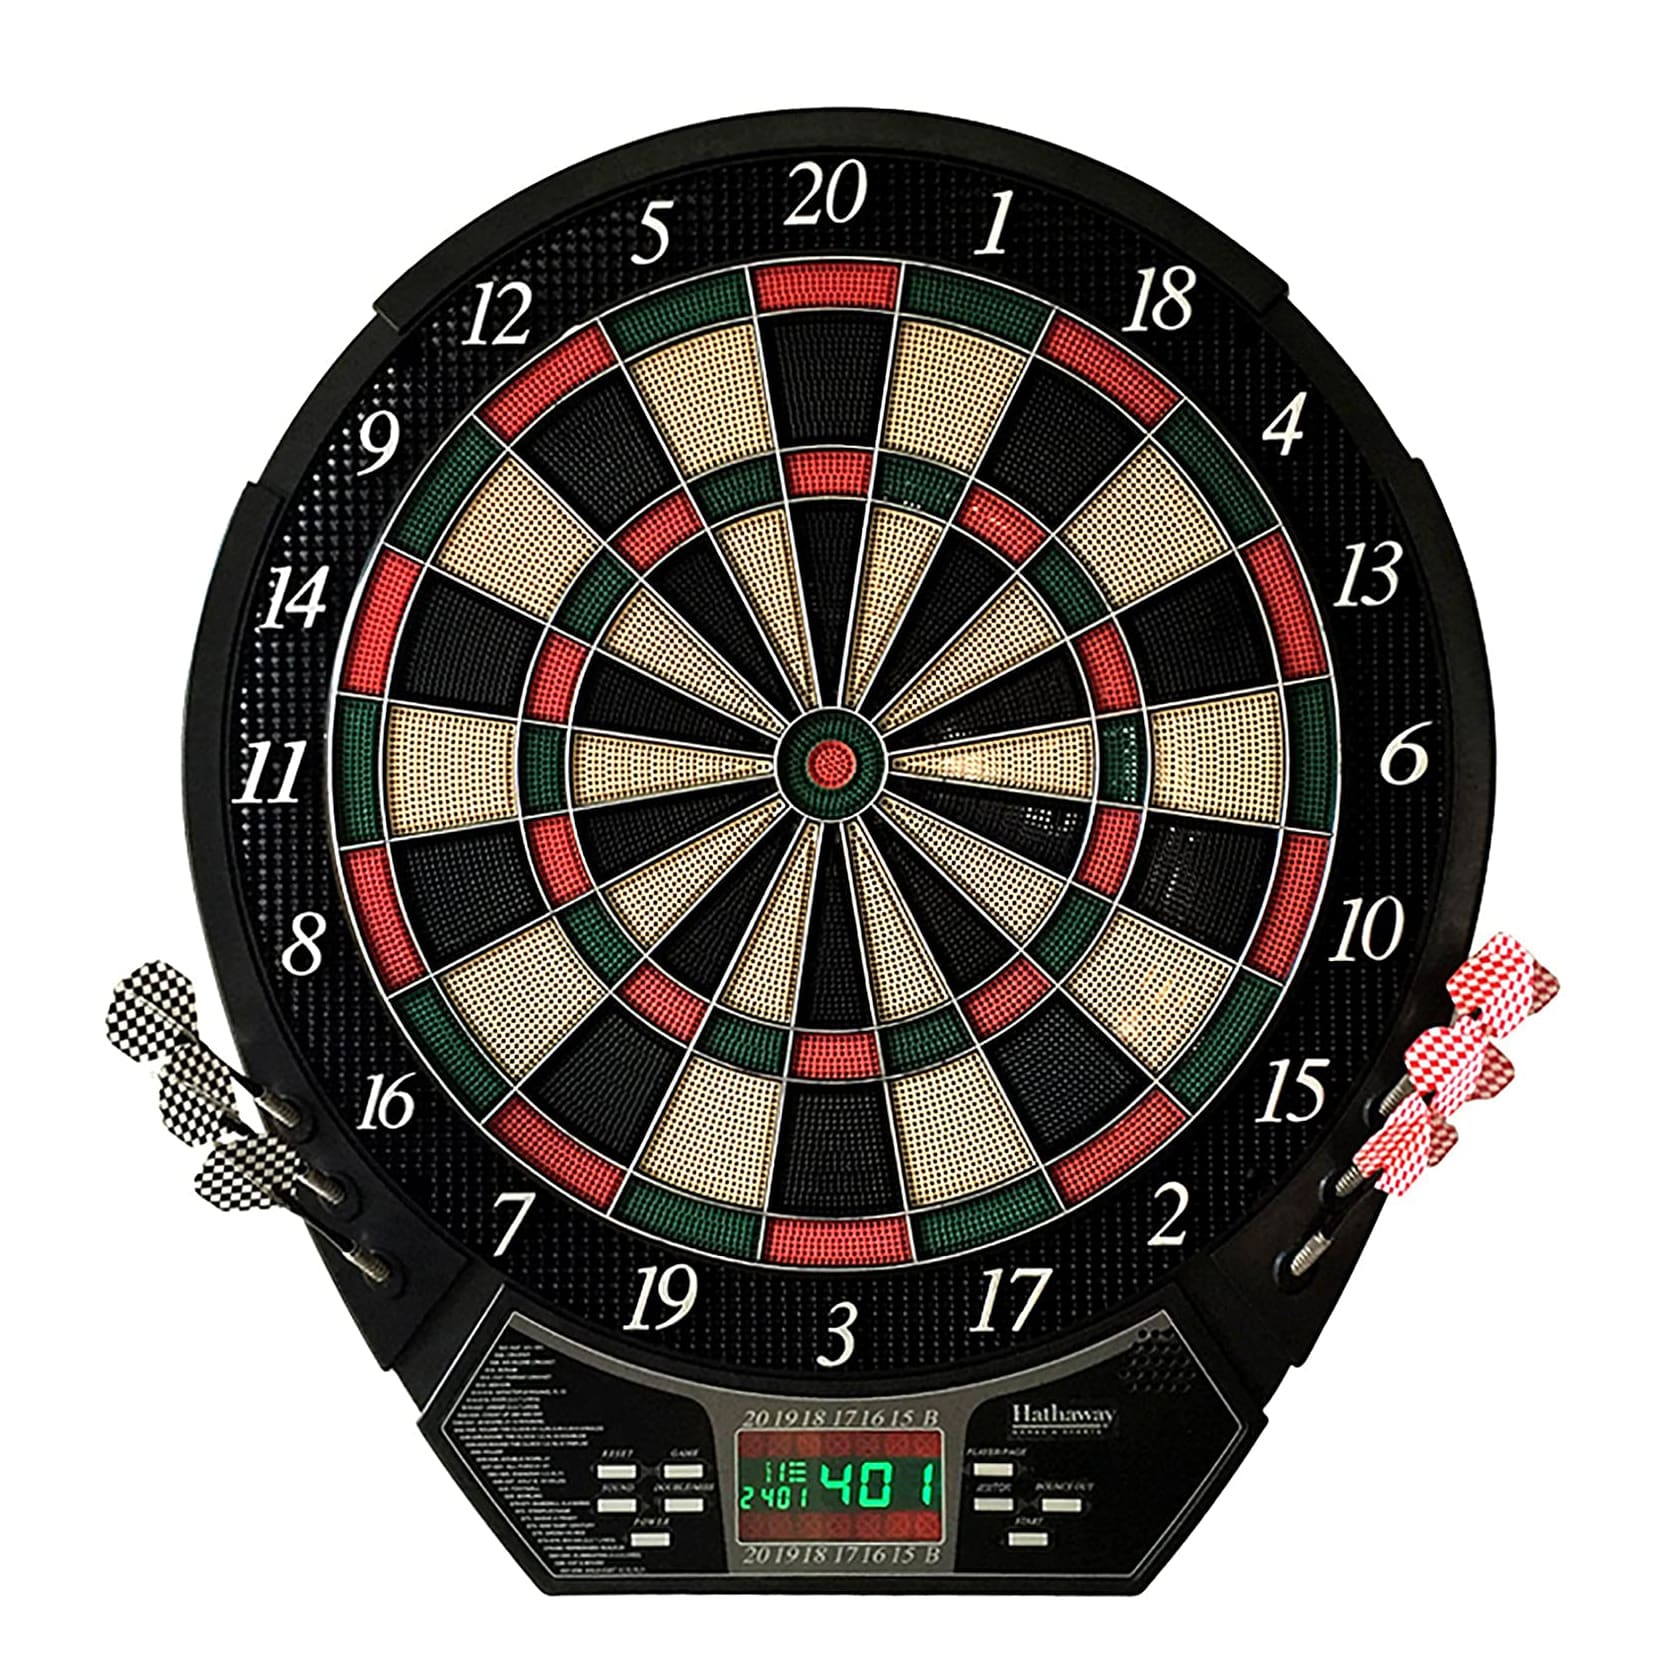 Top 10 Best Electronic Dart Boards In 2022 Reviews Show Guide Me